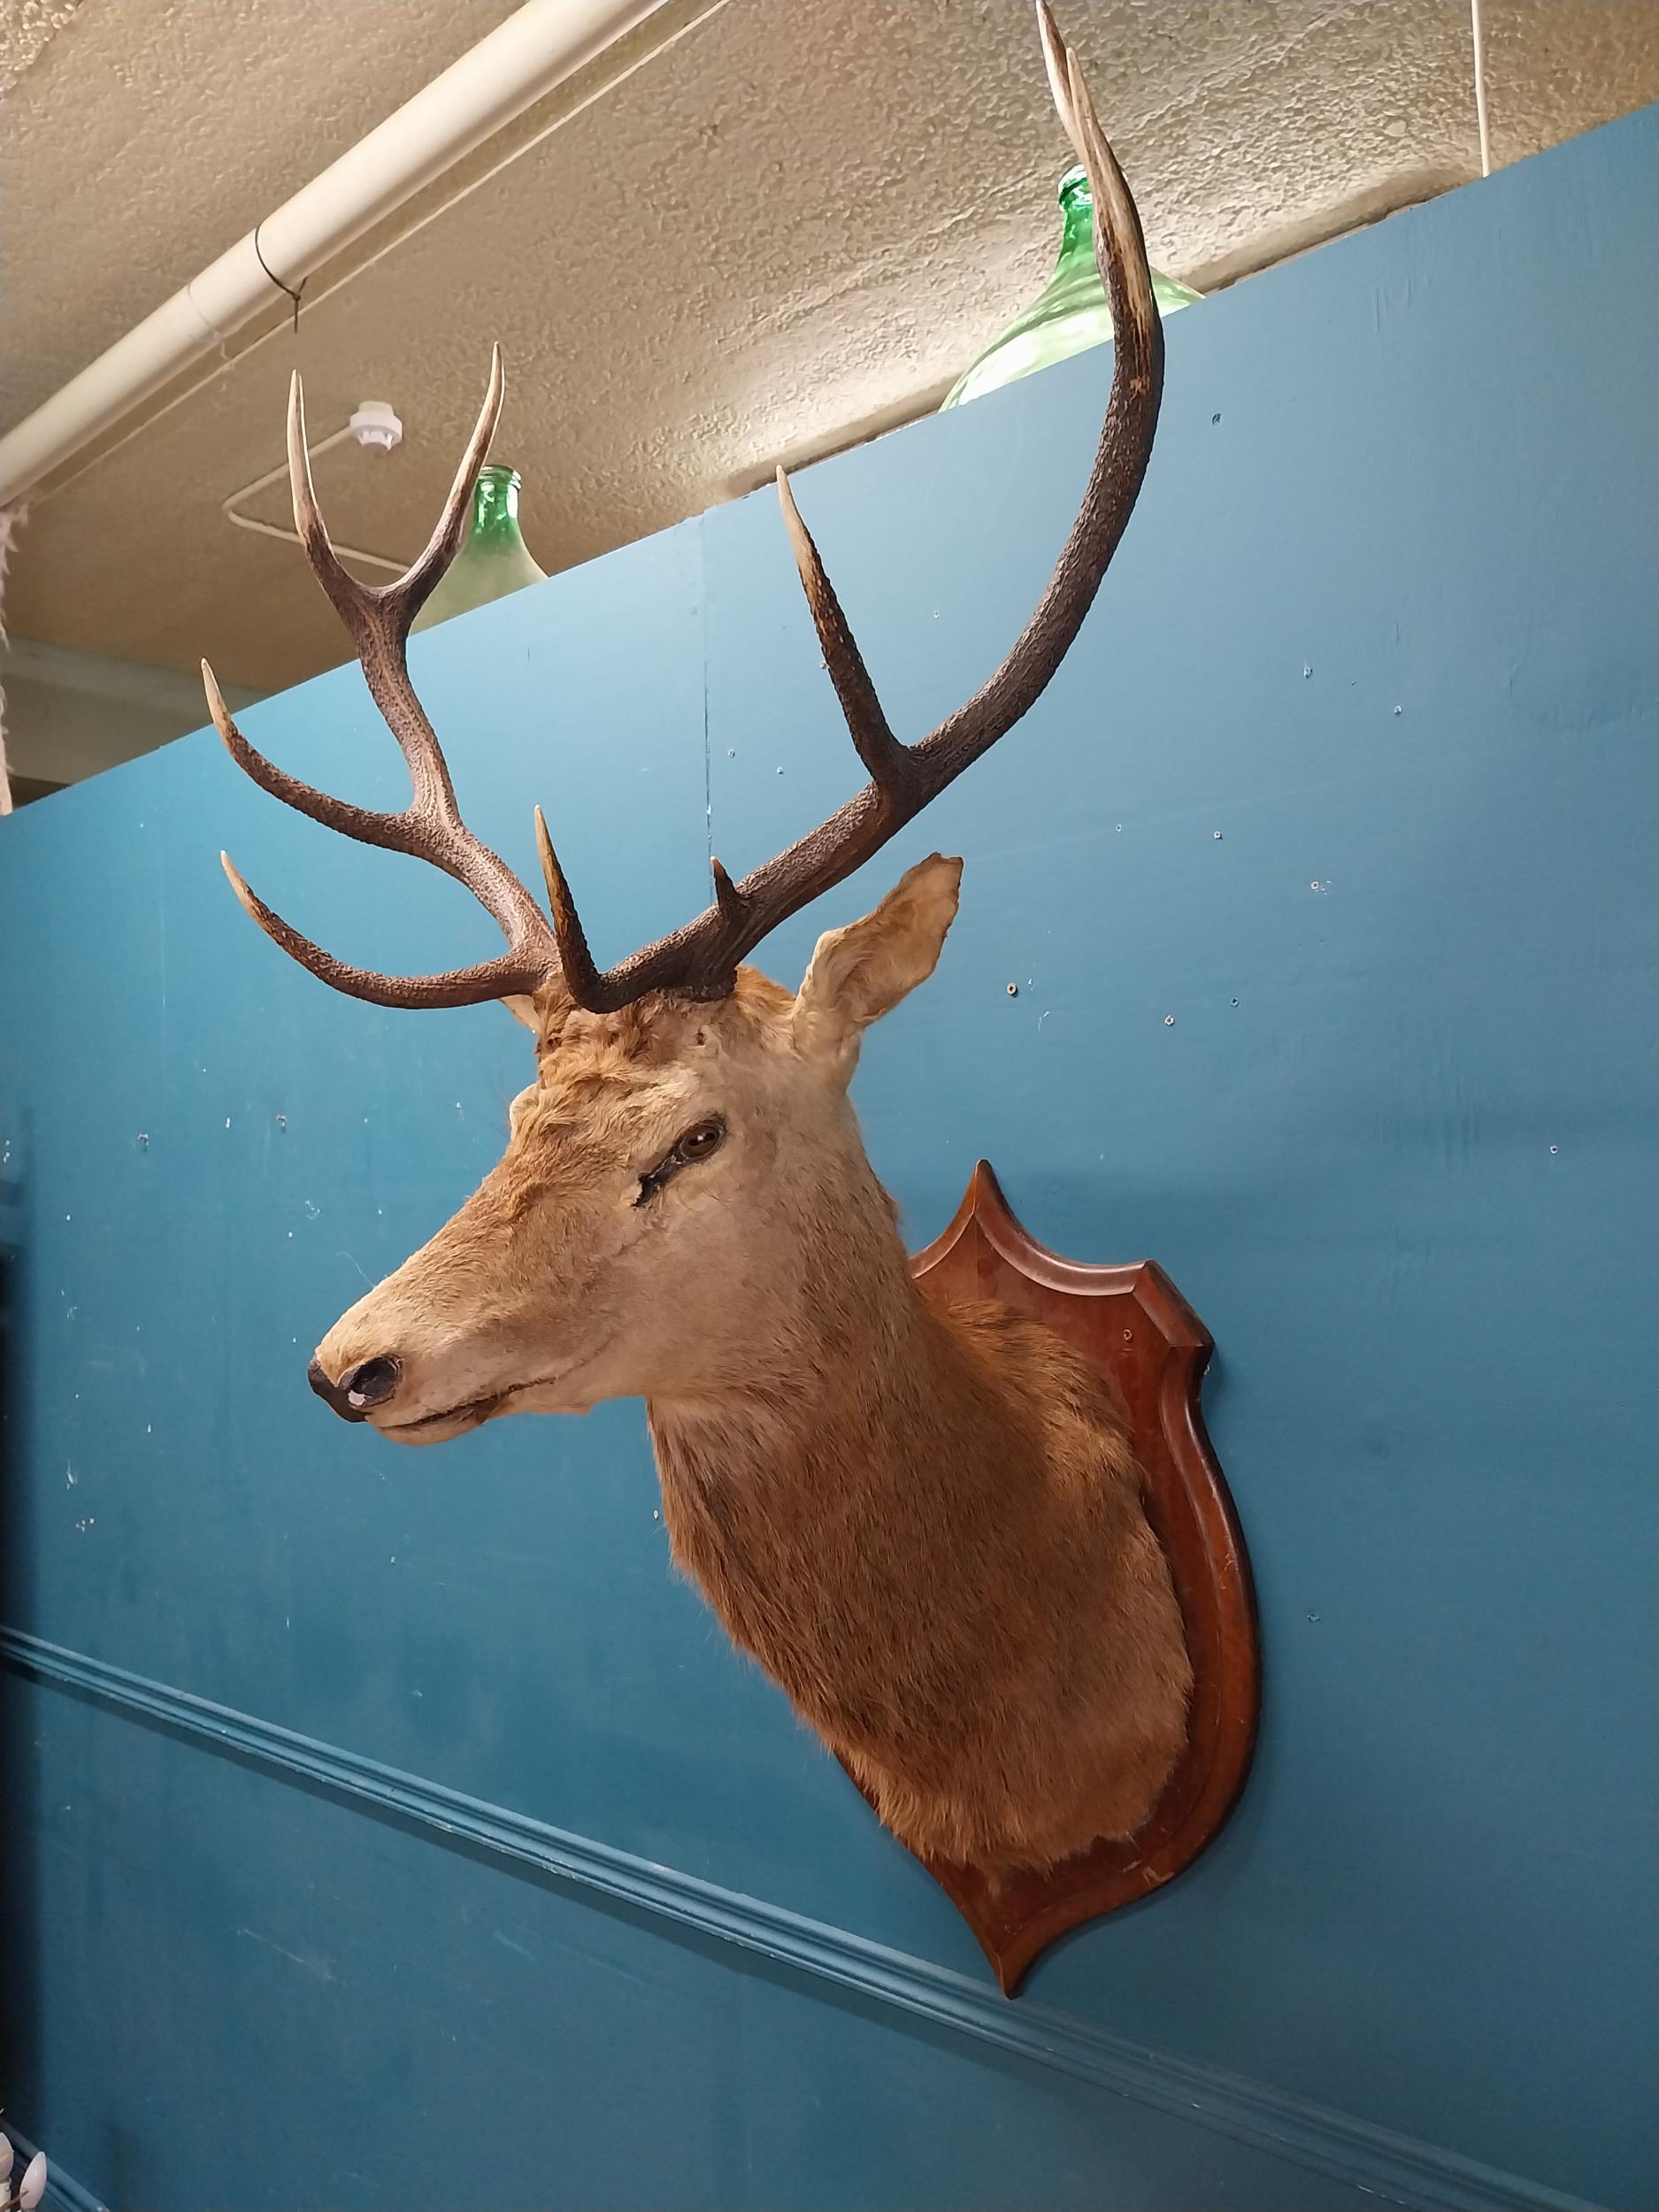 Early 20th C. taxidermy Stags head mounted on oak plaque {140 cm H x 100 cm W x 70 cm D}.